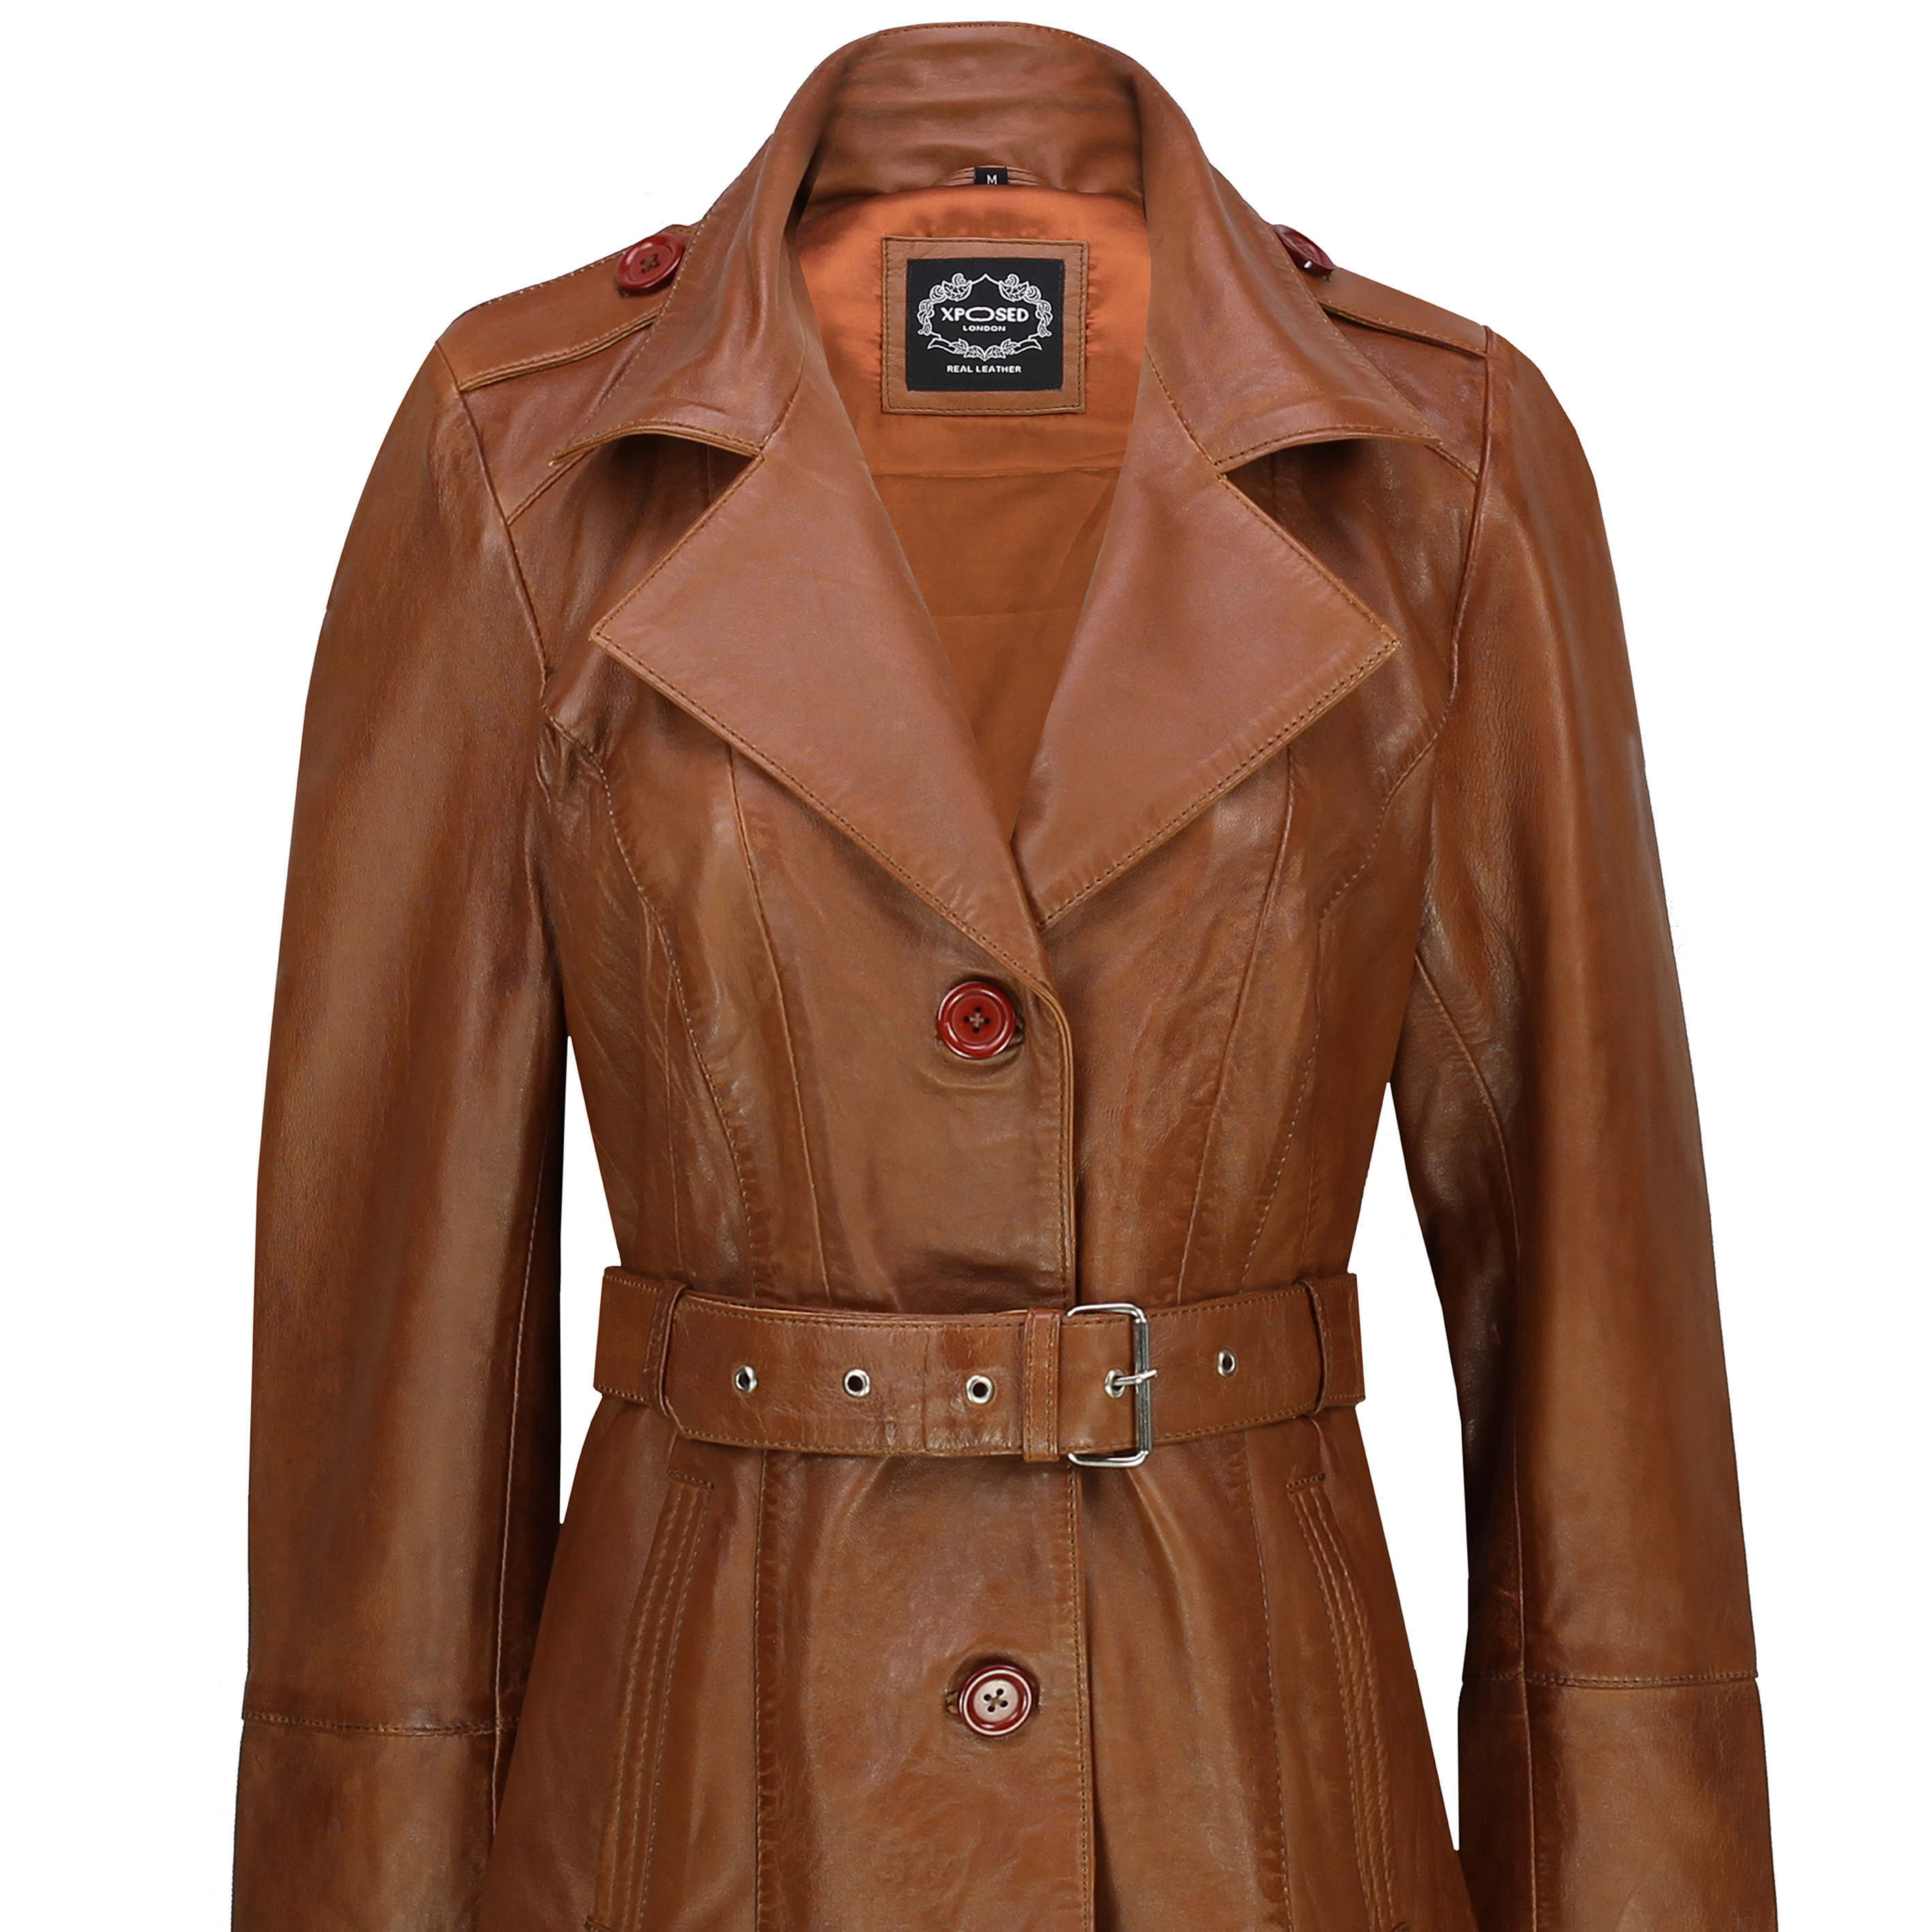 Womens MOD 3/4 Length Smart Fit Real Leather Coat Classic Ladies Trench Jacket | eBay